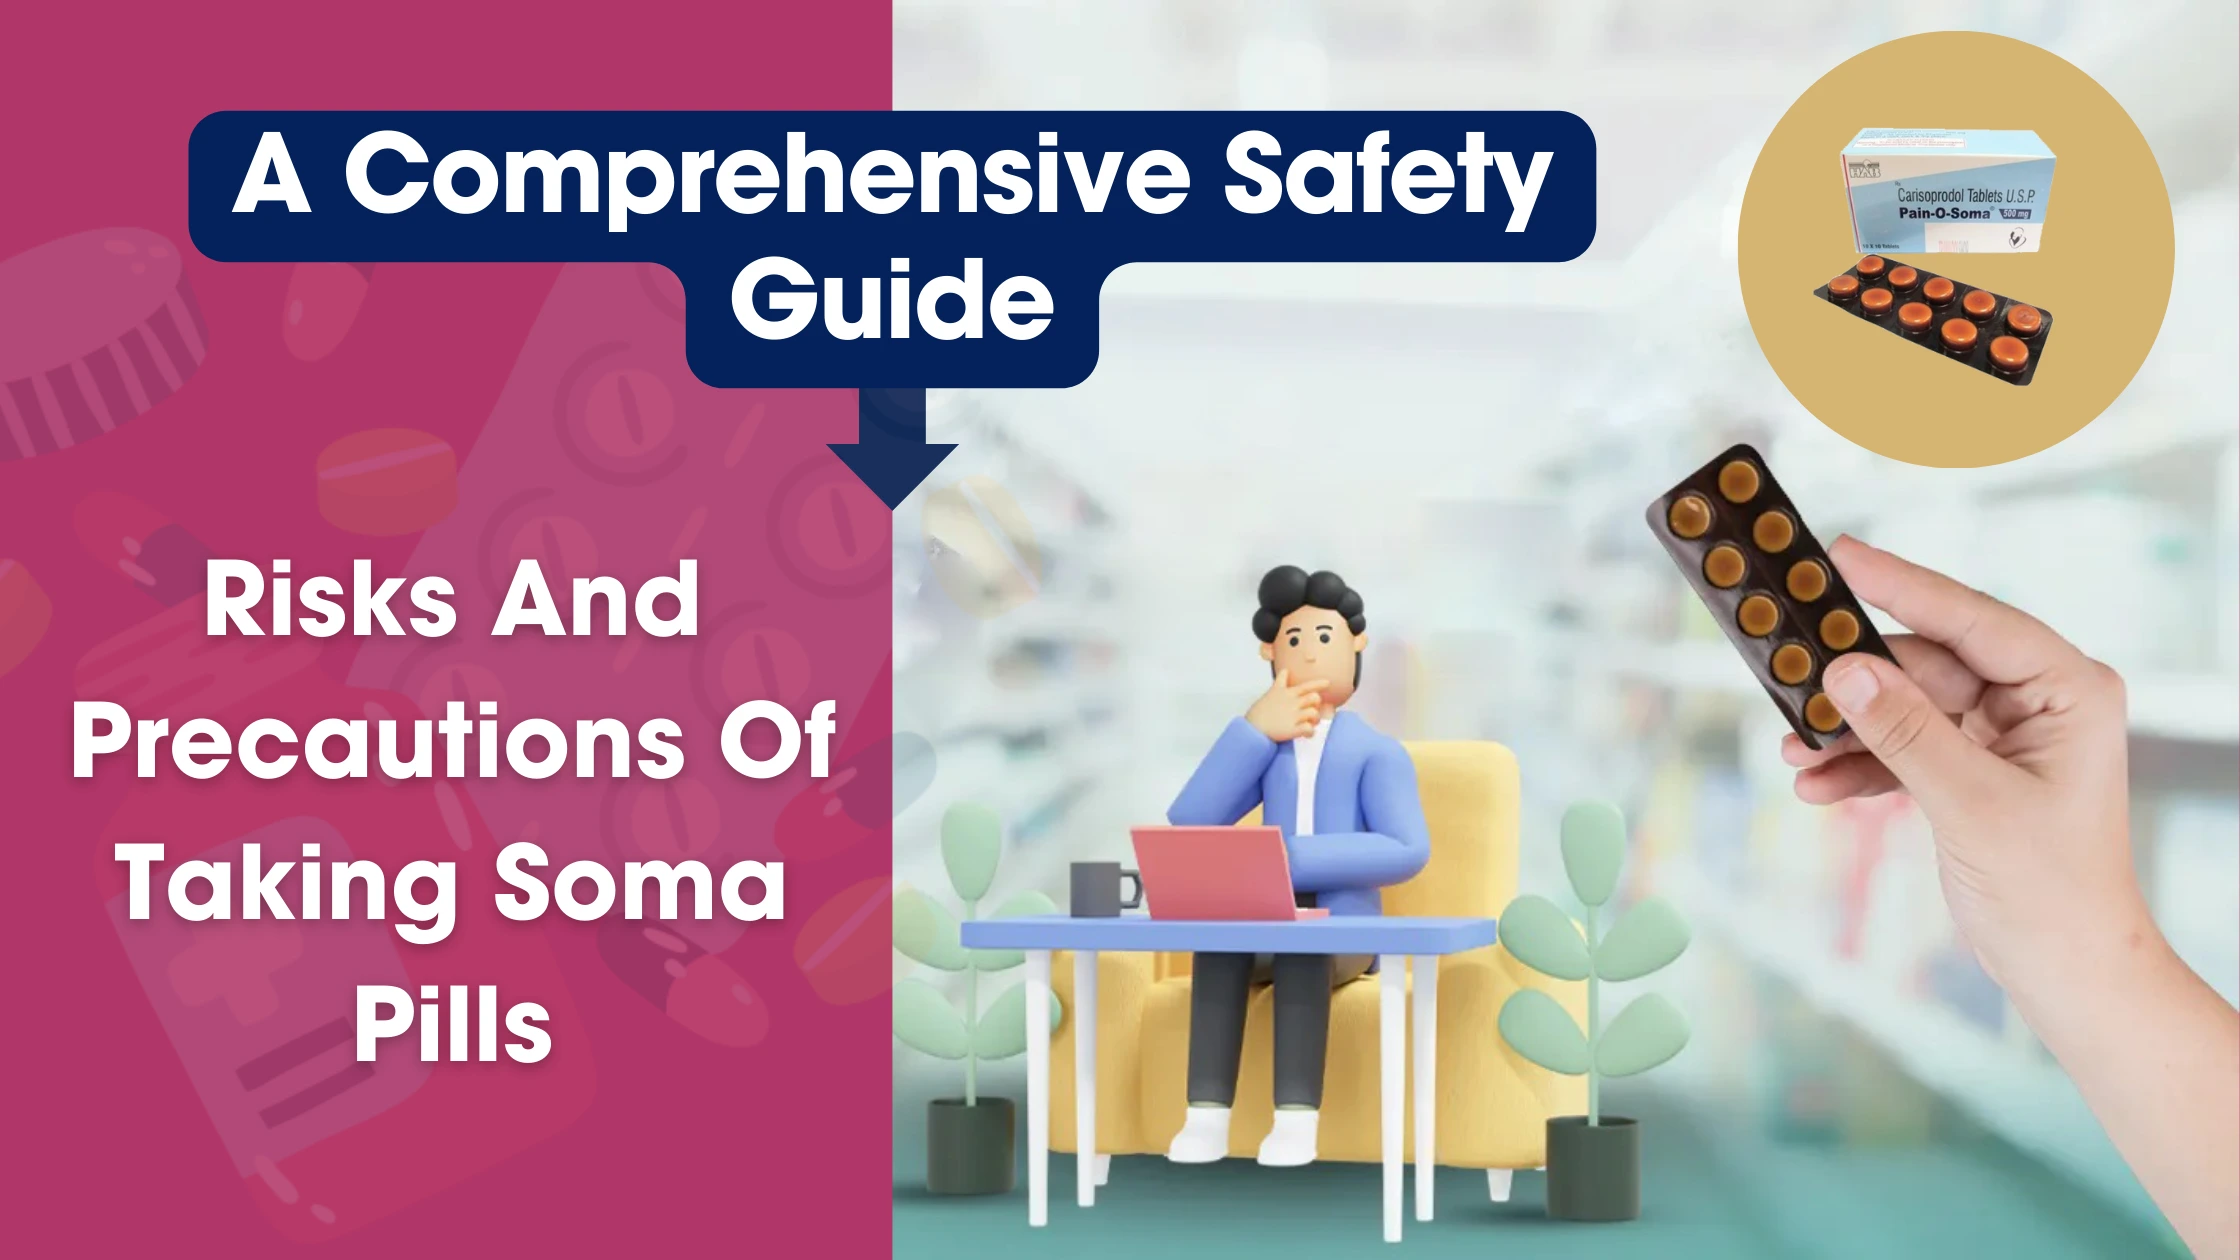 A Comprehensive Safety Guide - Risks And Precautions Of Taking Soma Pills